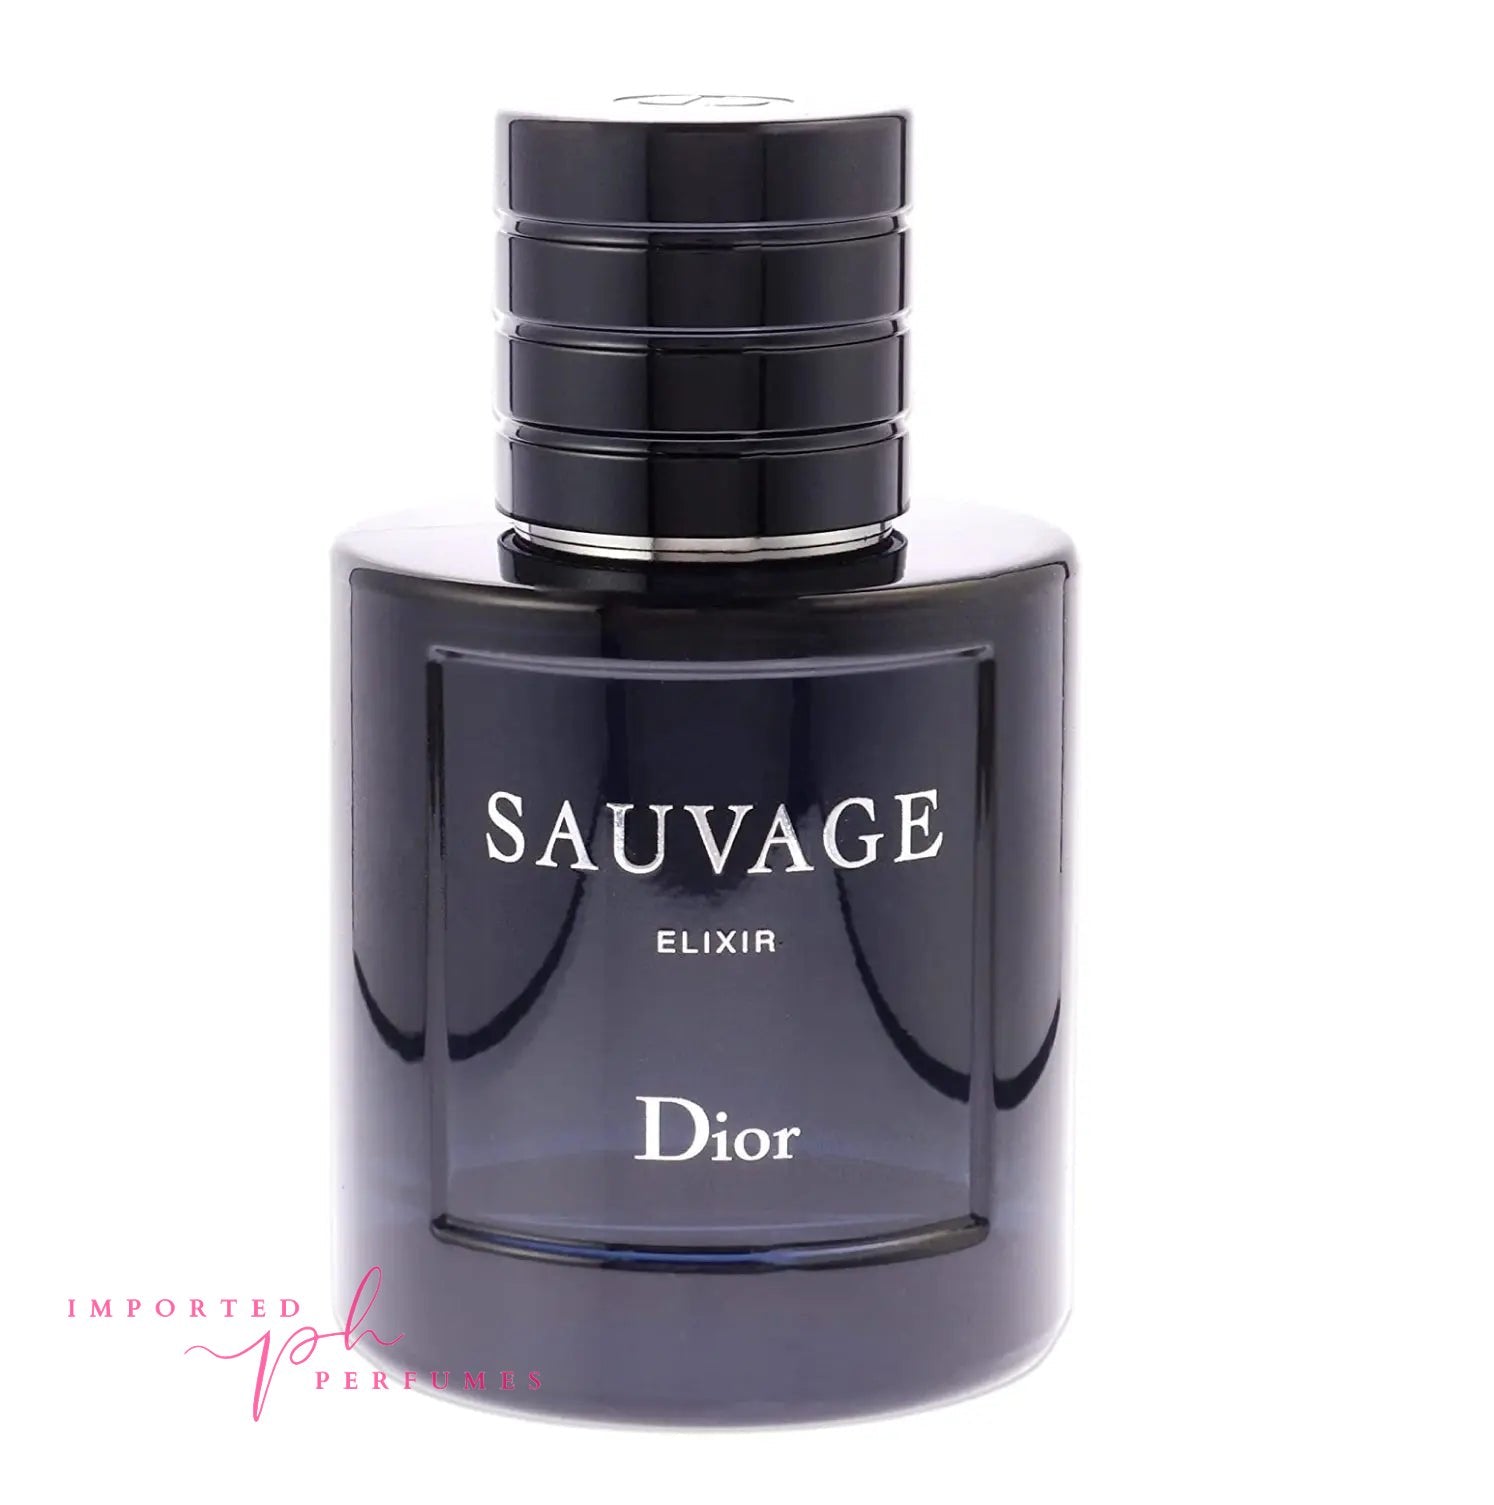 Dior Sauvage Elixir Men EDC For Men 60ml Imported Perfumes & Beauty Store